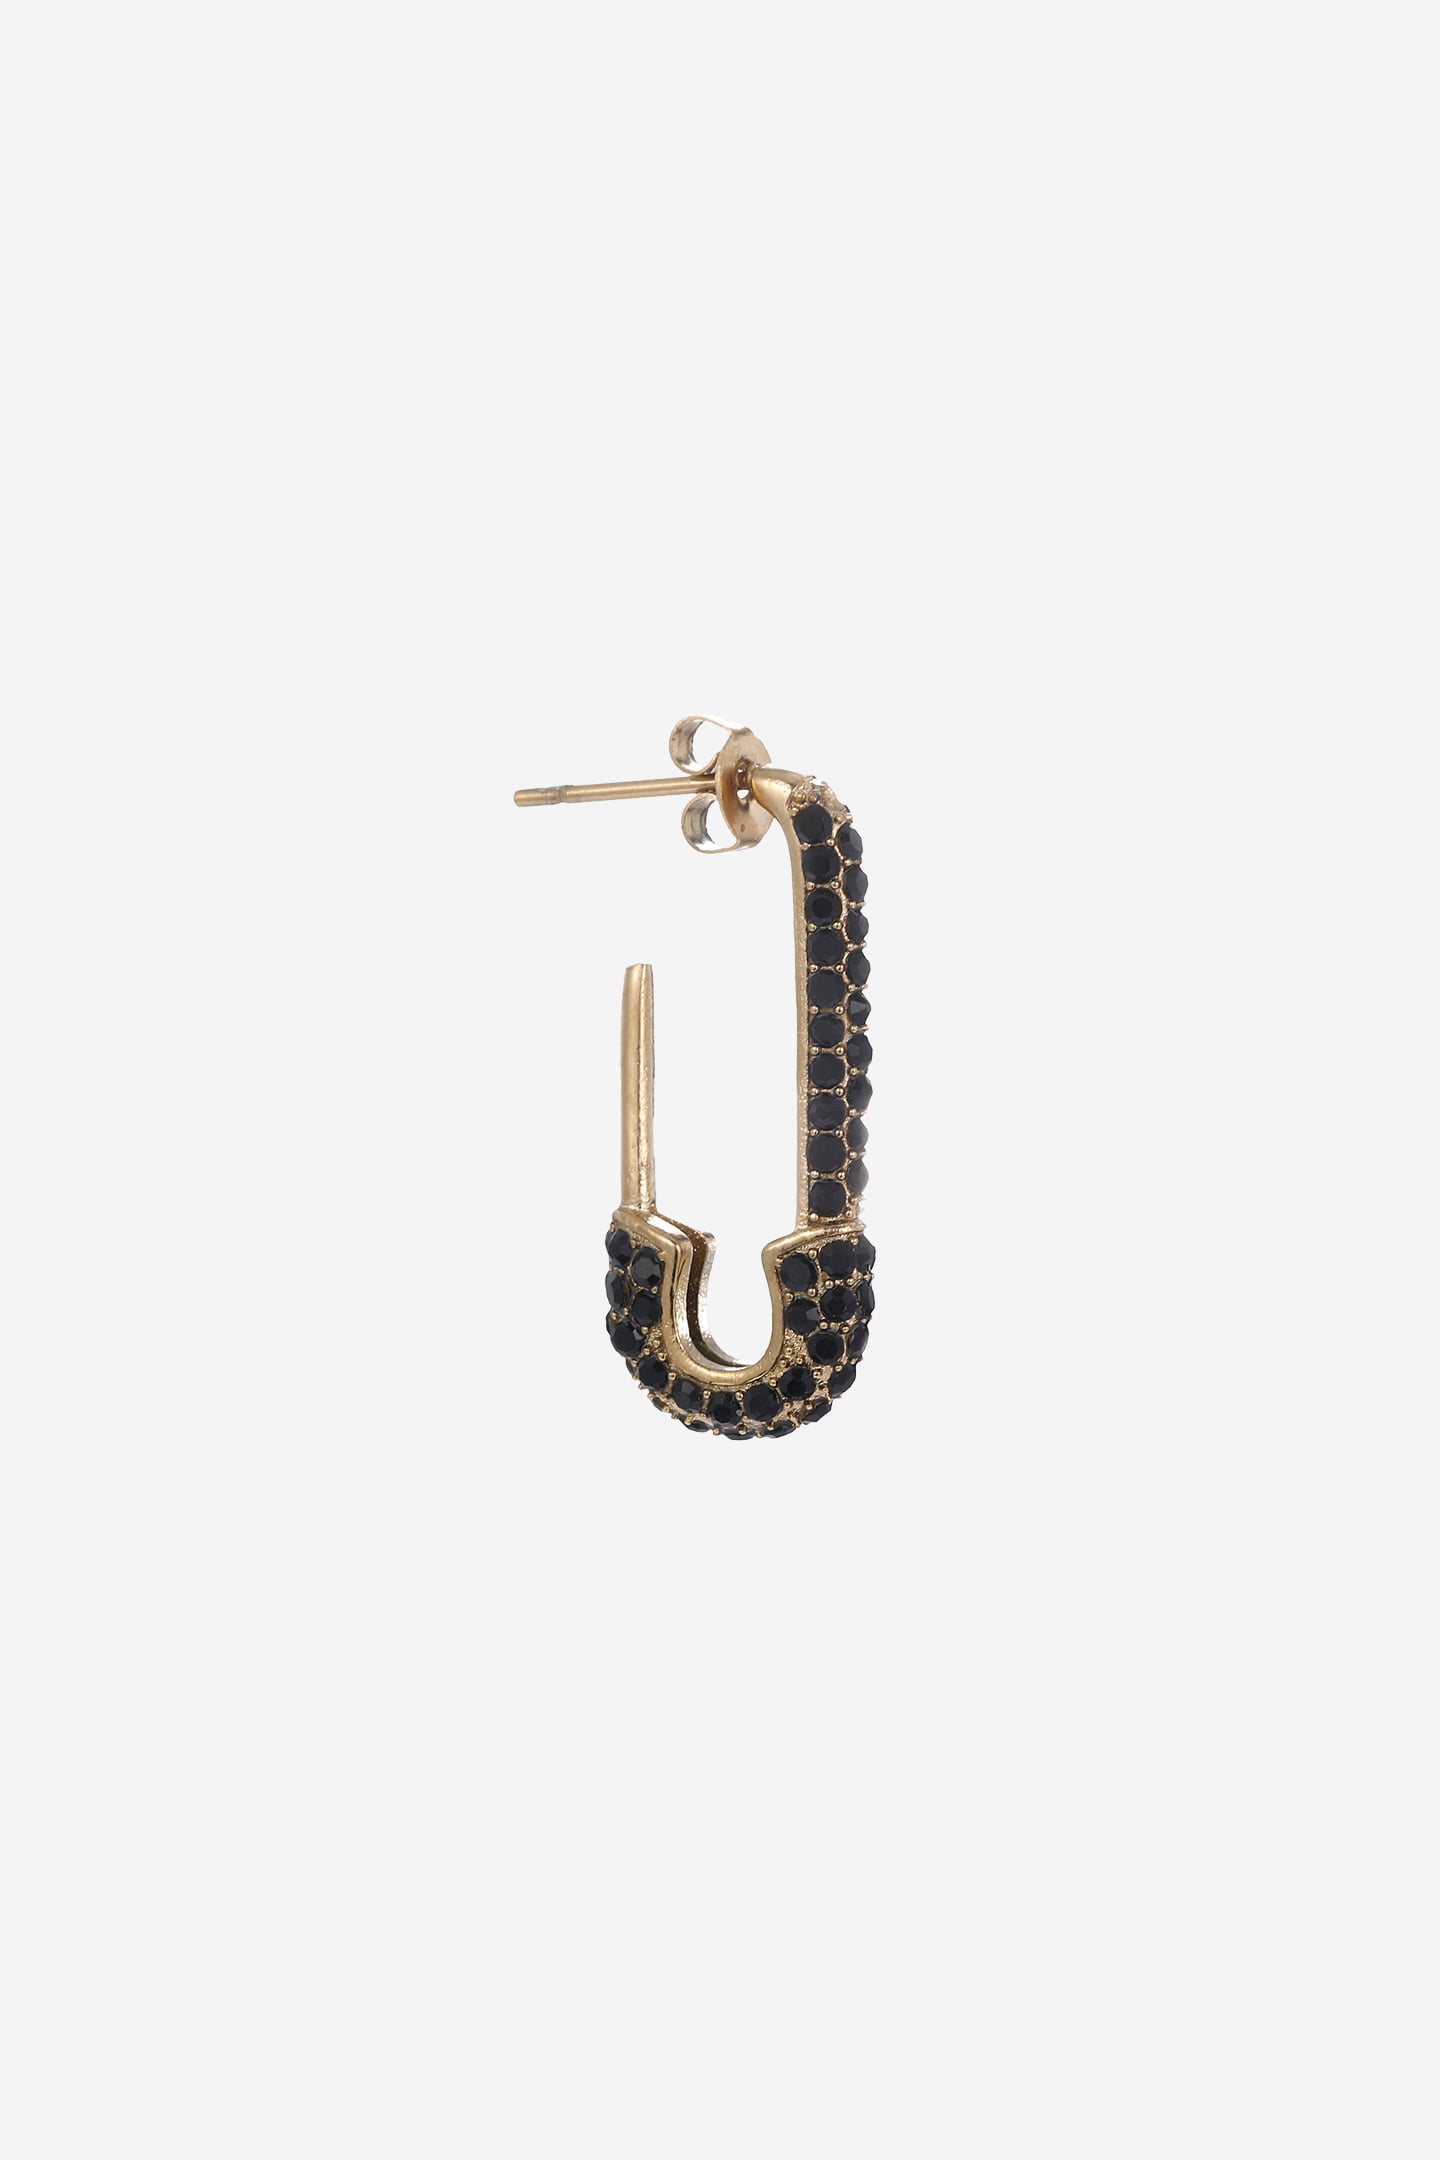 Safety Pin Earring Black Gold and White Diamonds - Anita Ko - Earrings for  women - Mad Lords – MAD LORDS